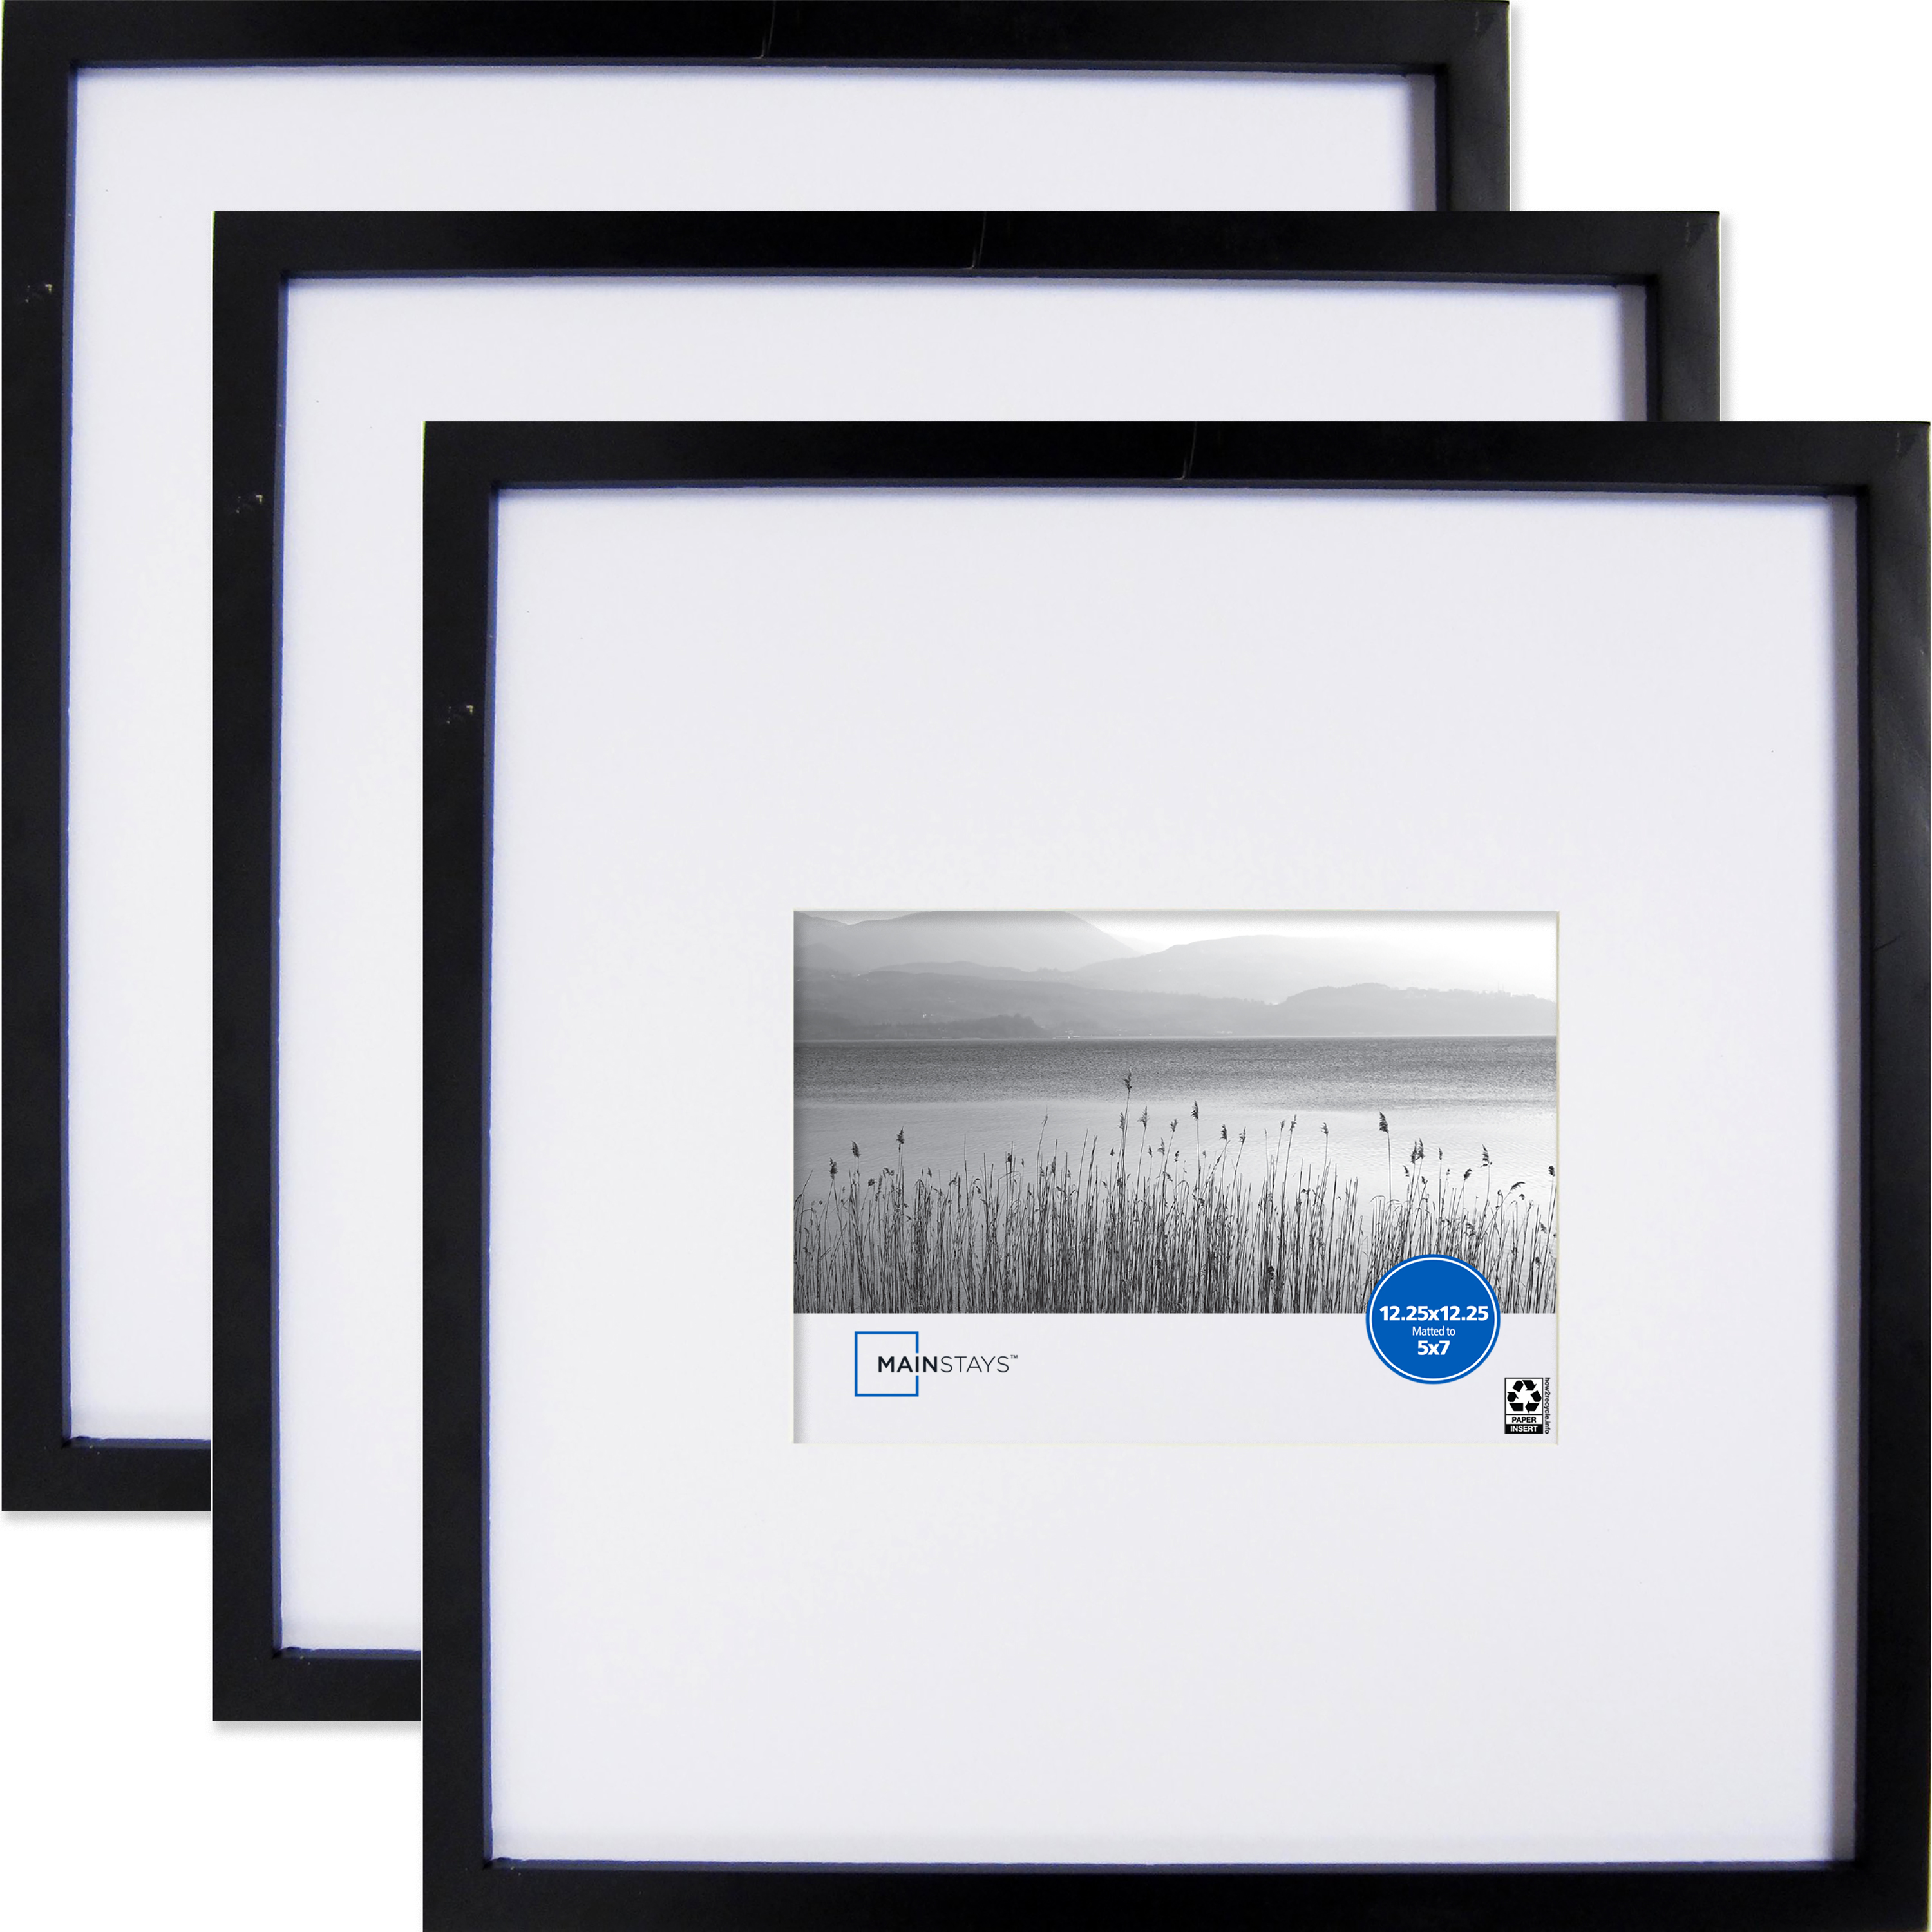 Mainstays 12.25x12.25 Matted to 5x7 Linear Gallery Wall Picture Frame, Set of 3 - image 1 of 8